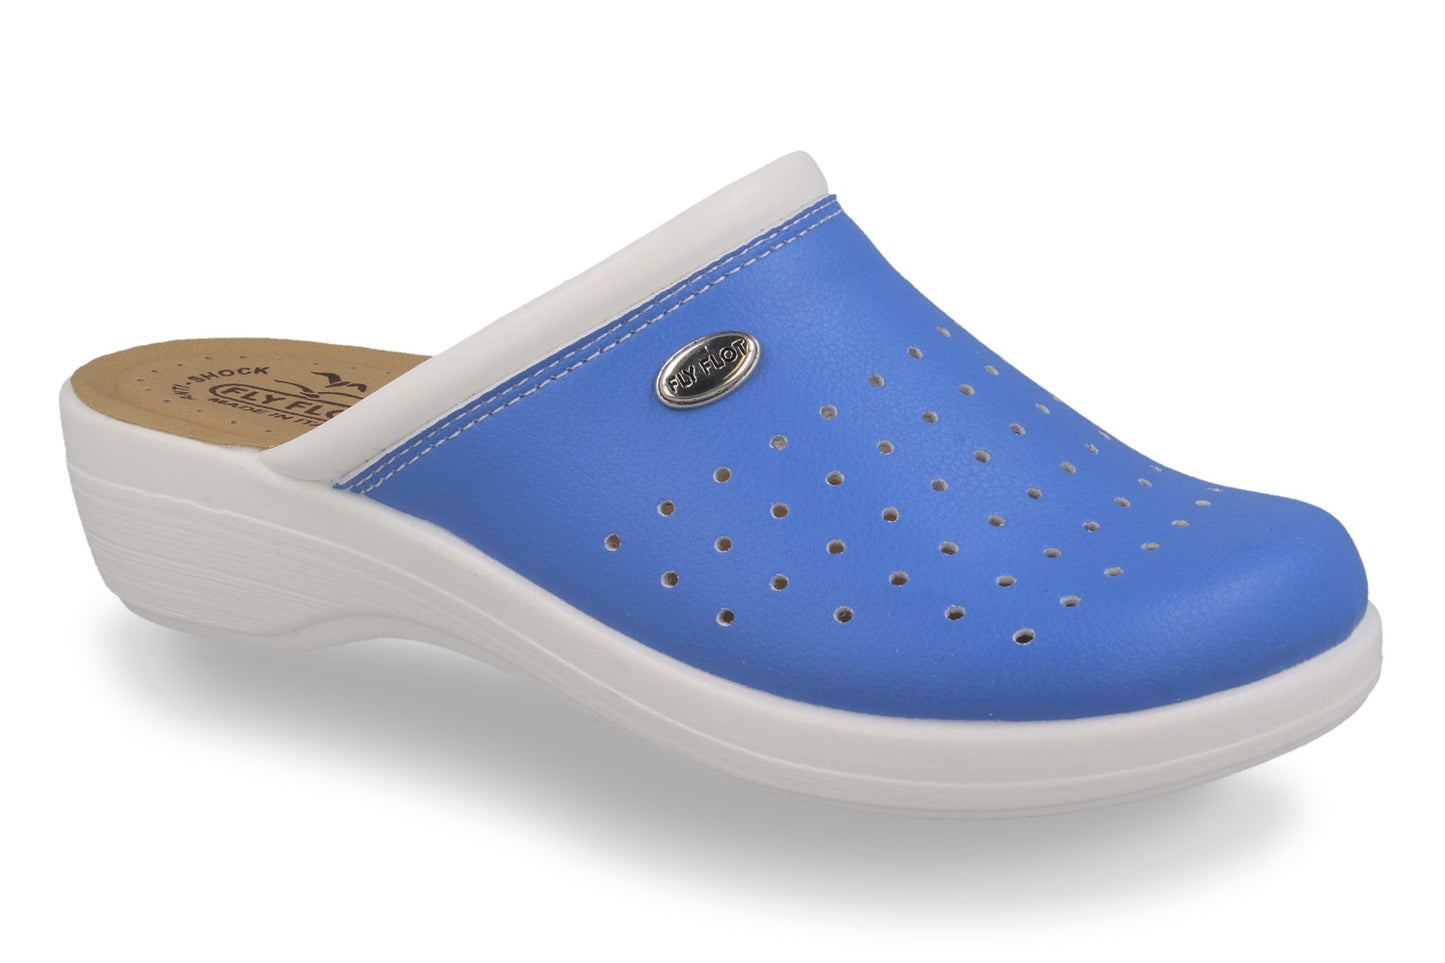 See the Light Blue Professional  With Faux Leather Upper And Insole Women Clogs in the colour LIGHT BLUE, available in various sizes